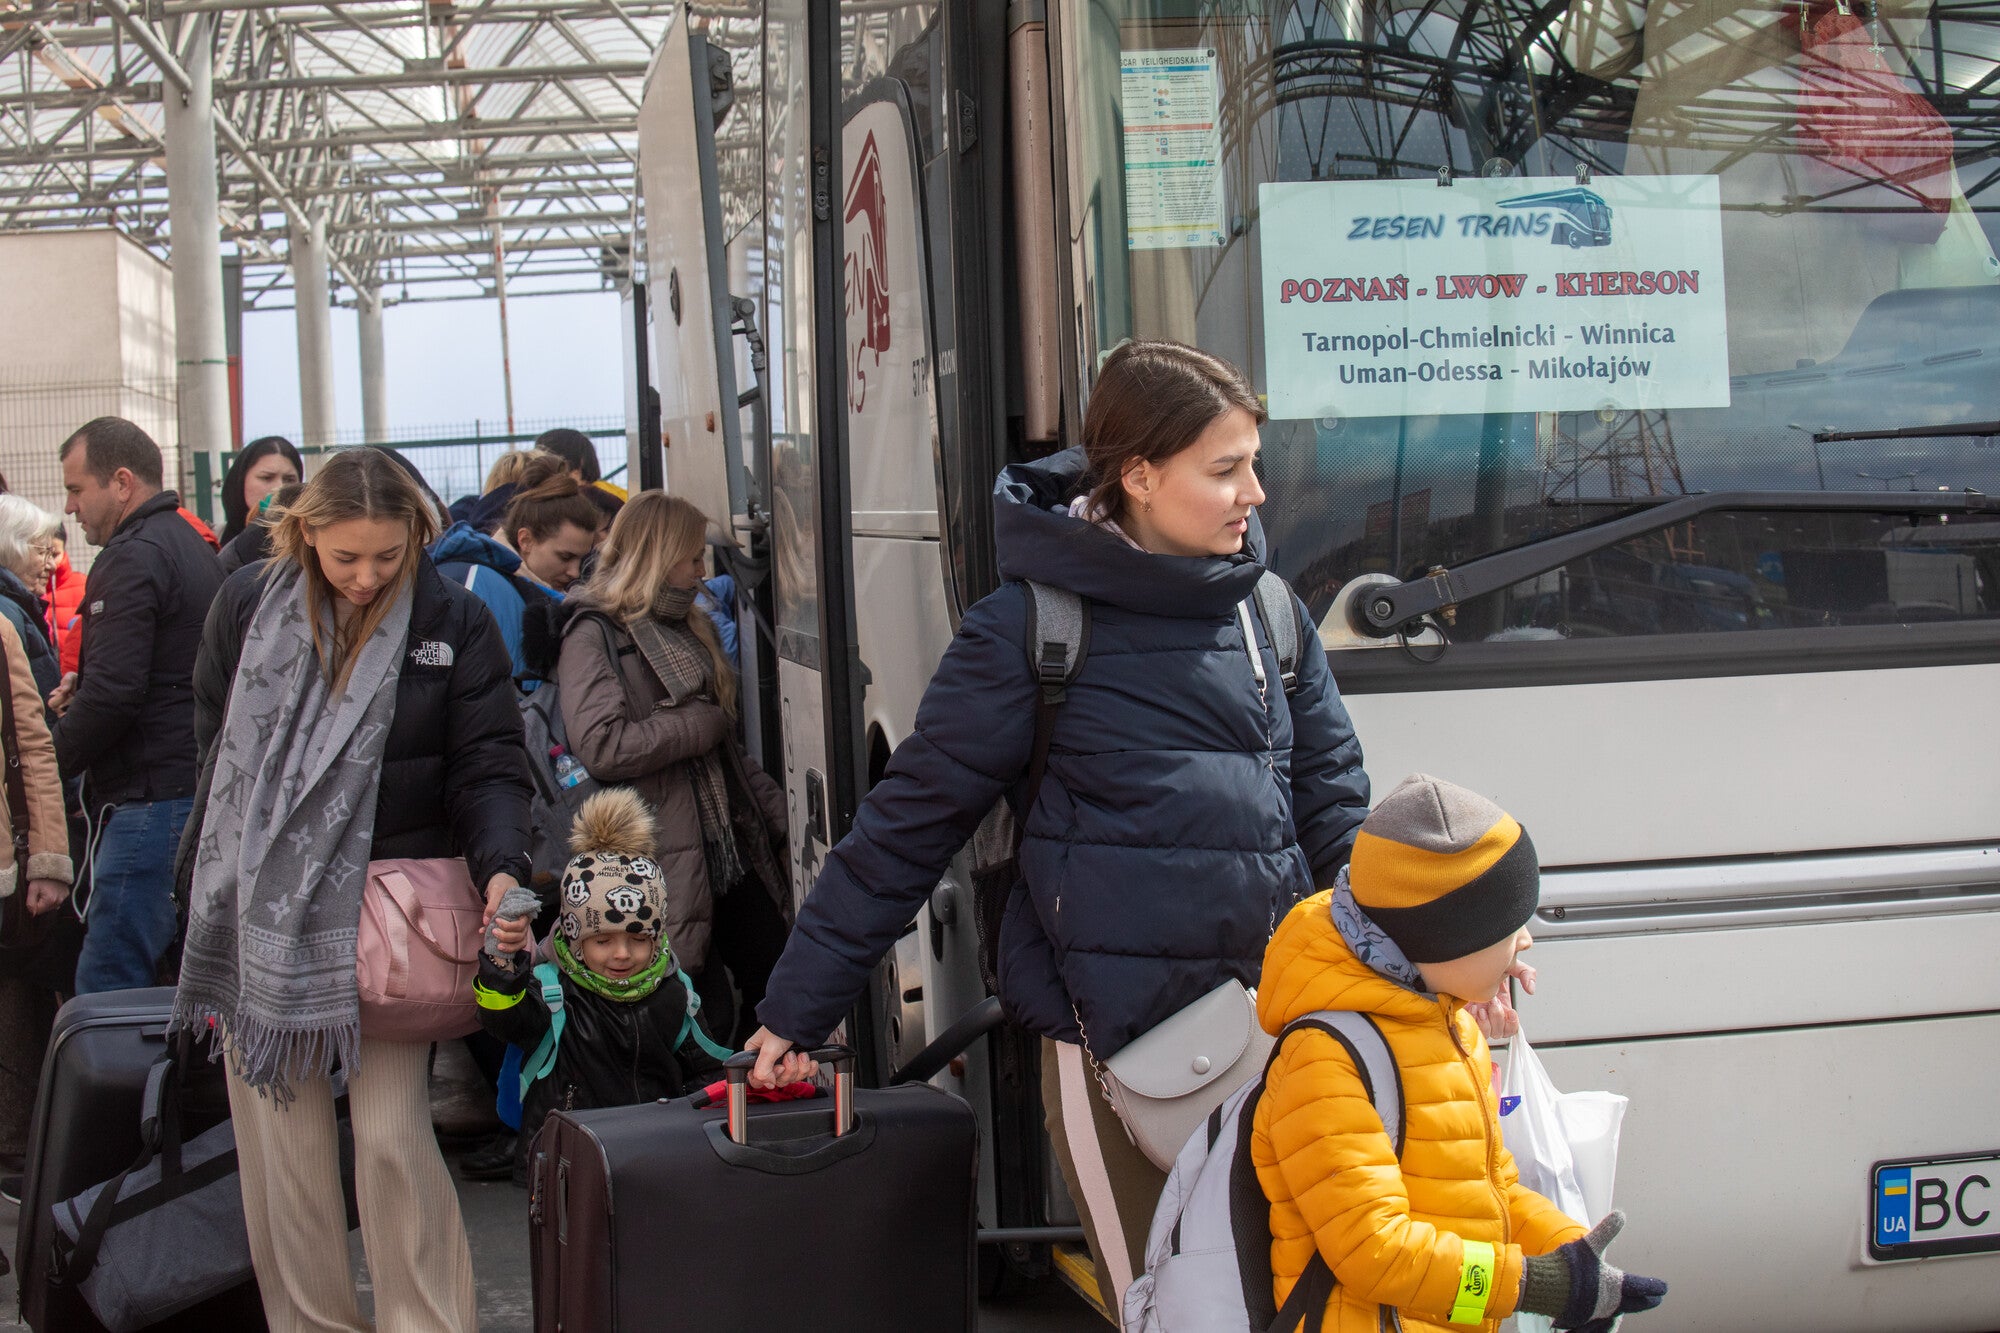 Ukrainian refugee woman with children steps off a bus with suitcases